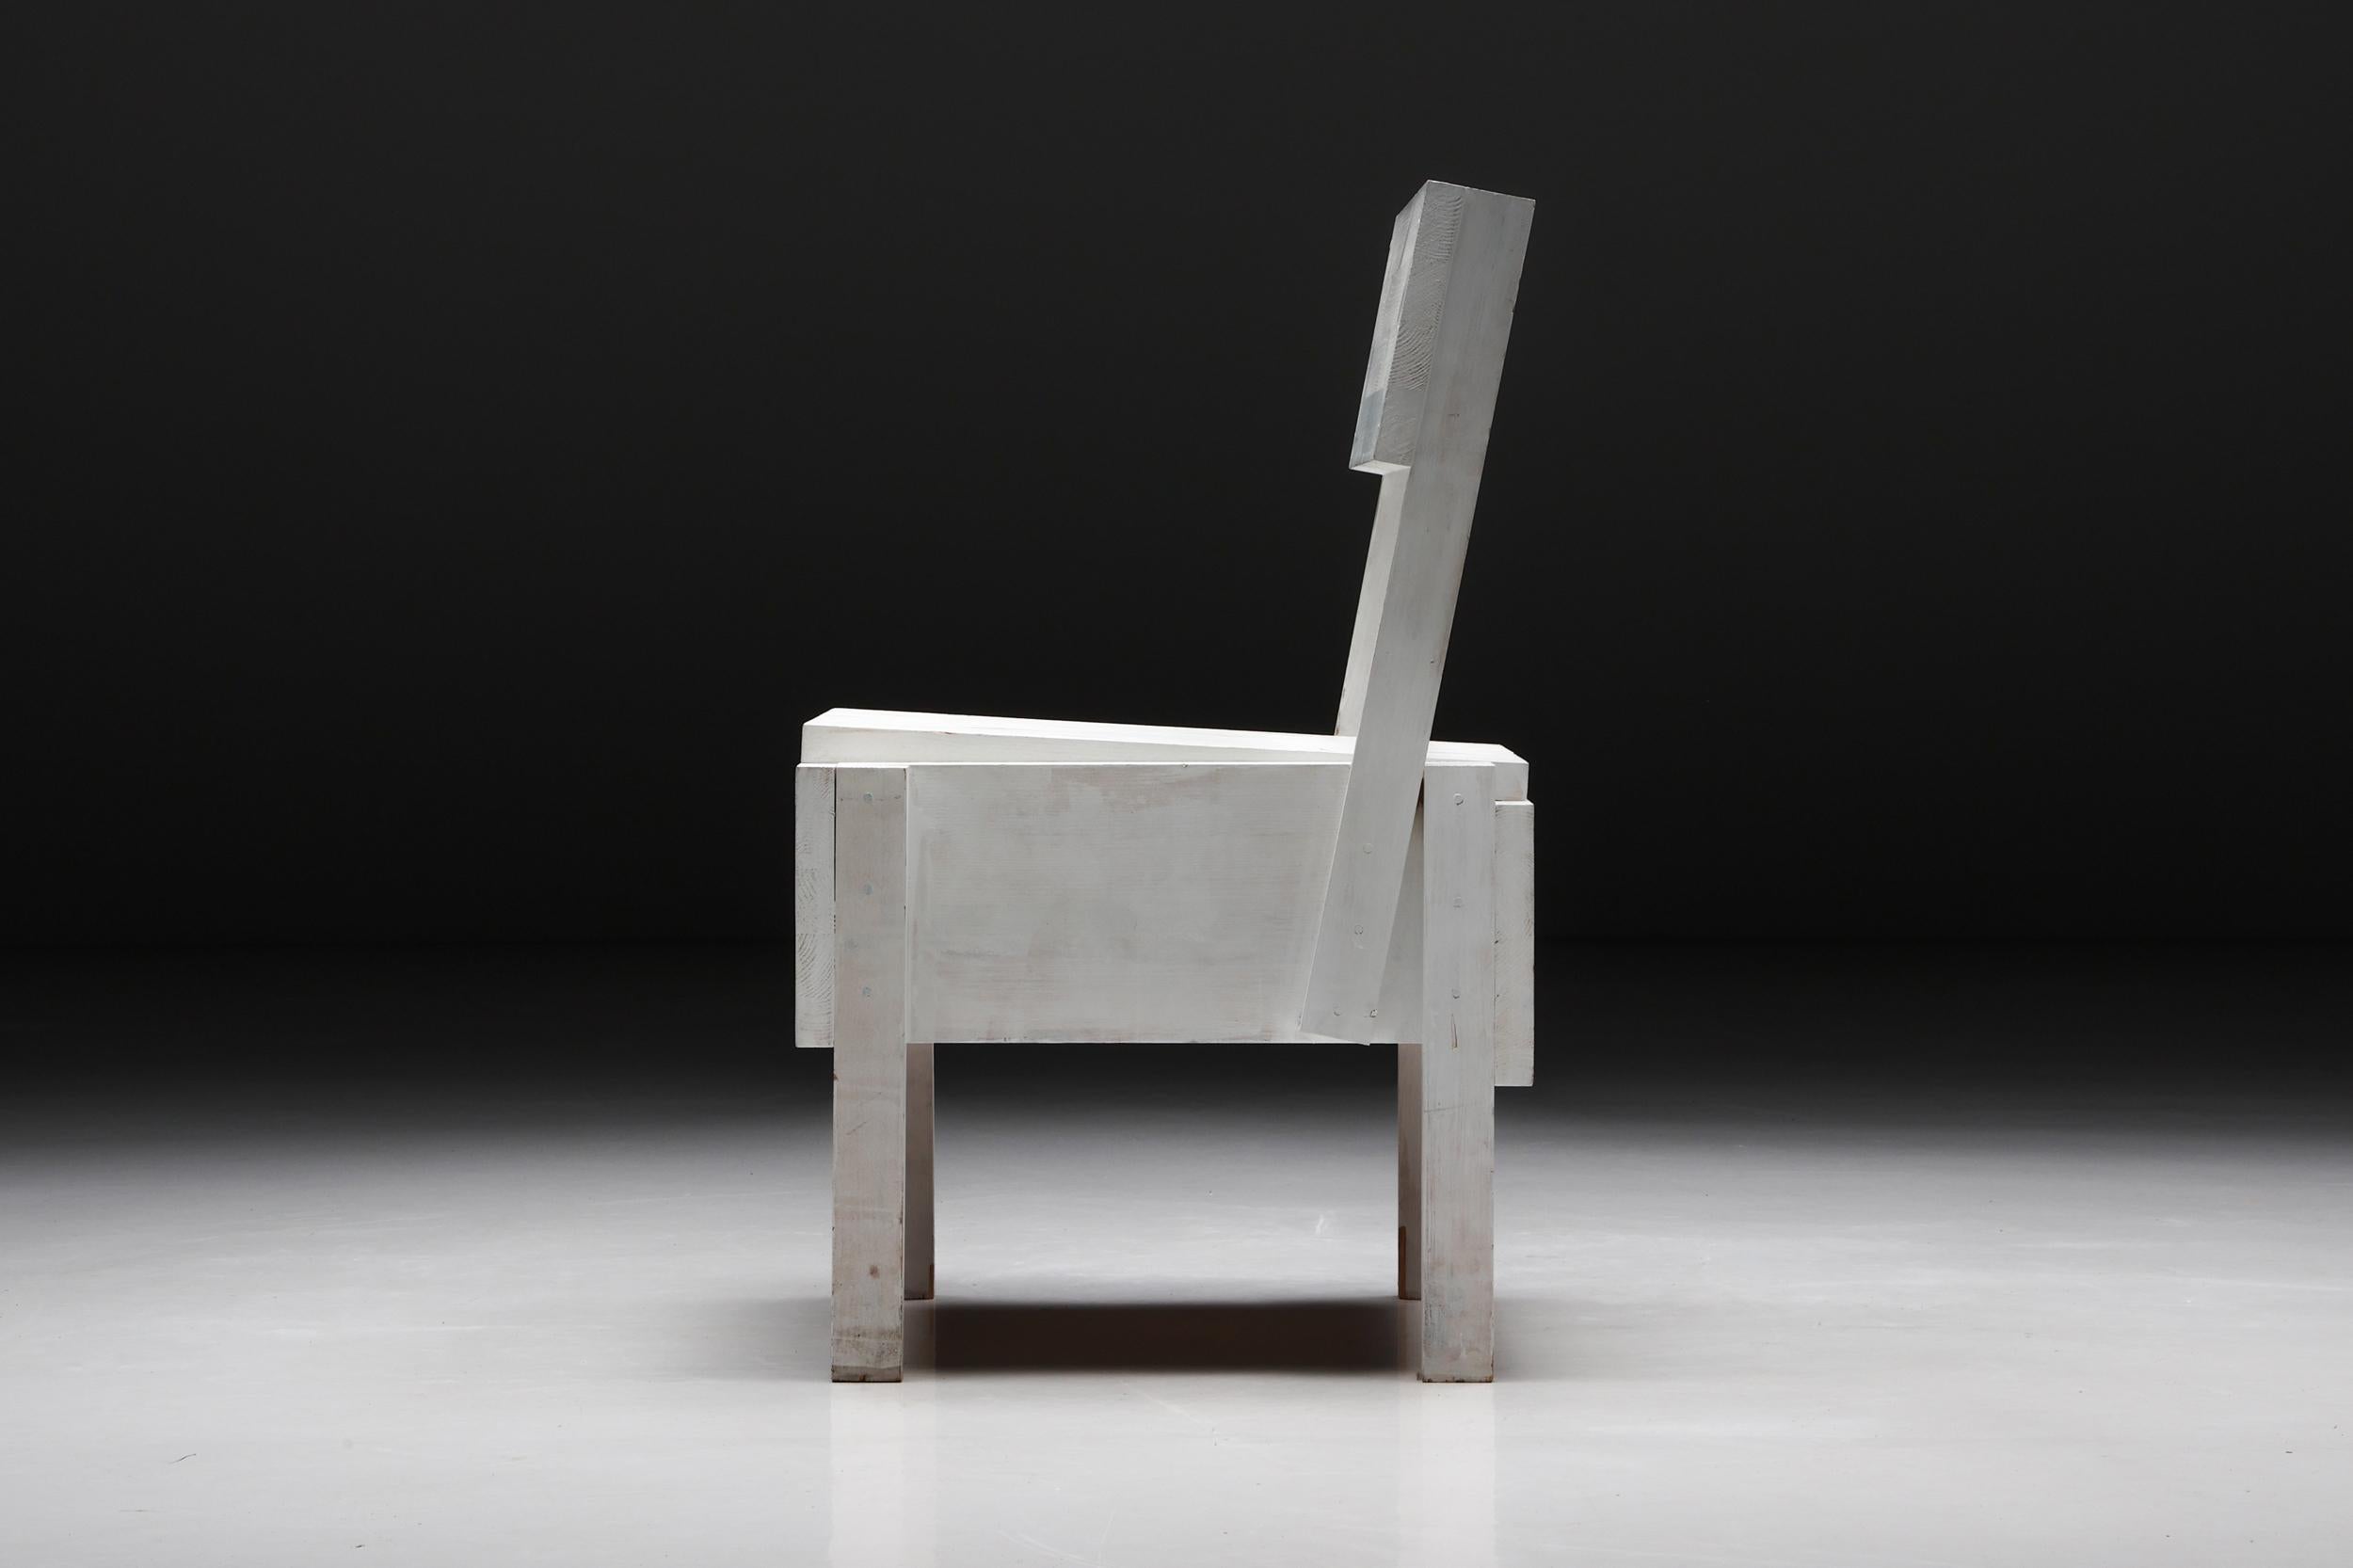 Enzo Mari 'Sedia 1' Chair for Artek, Finland, 2010 In Excellent Condition For Sale In Antwerp, BE